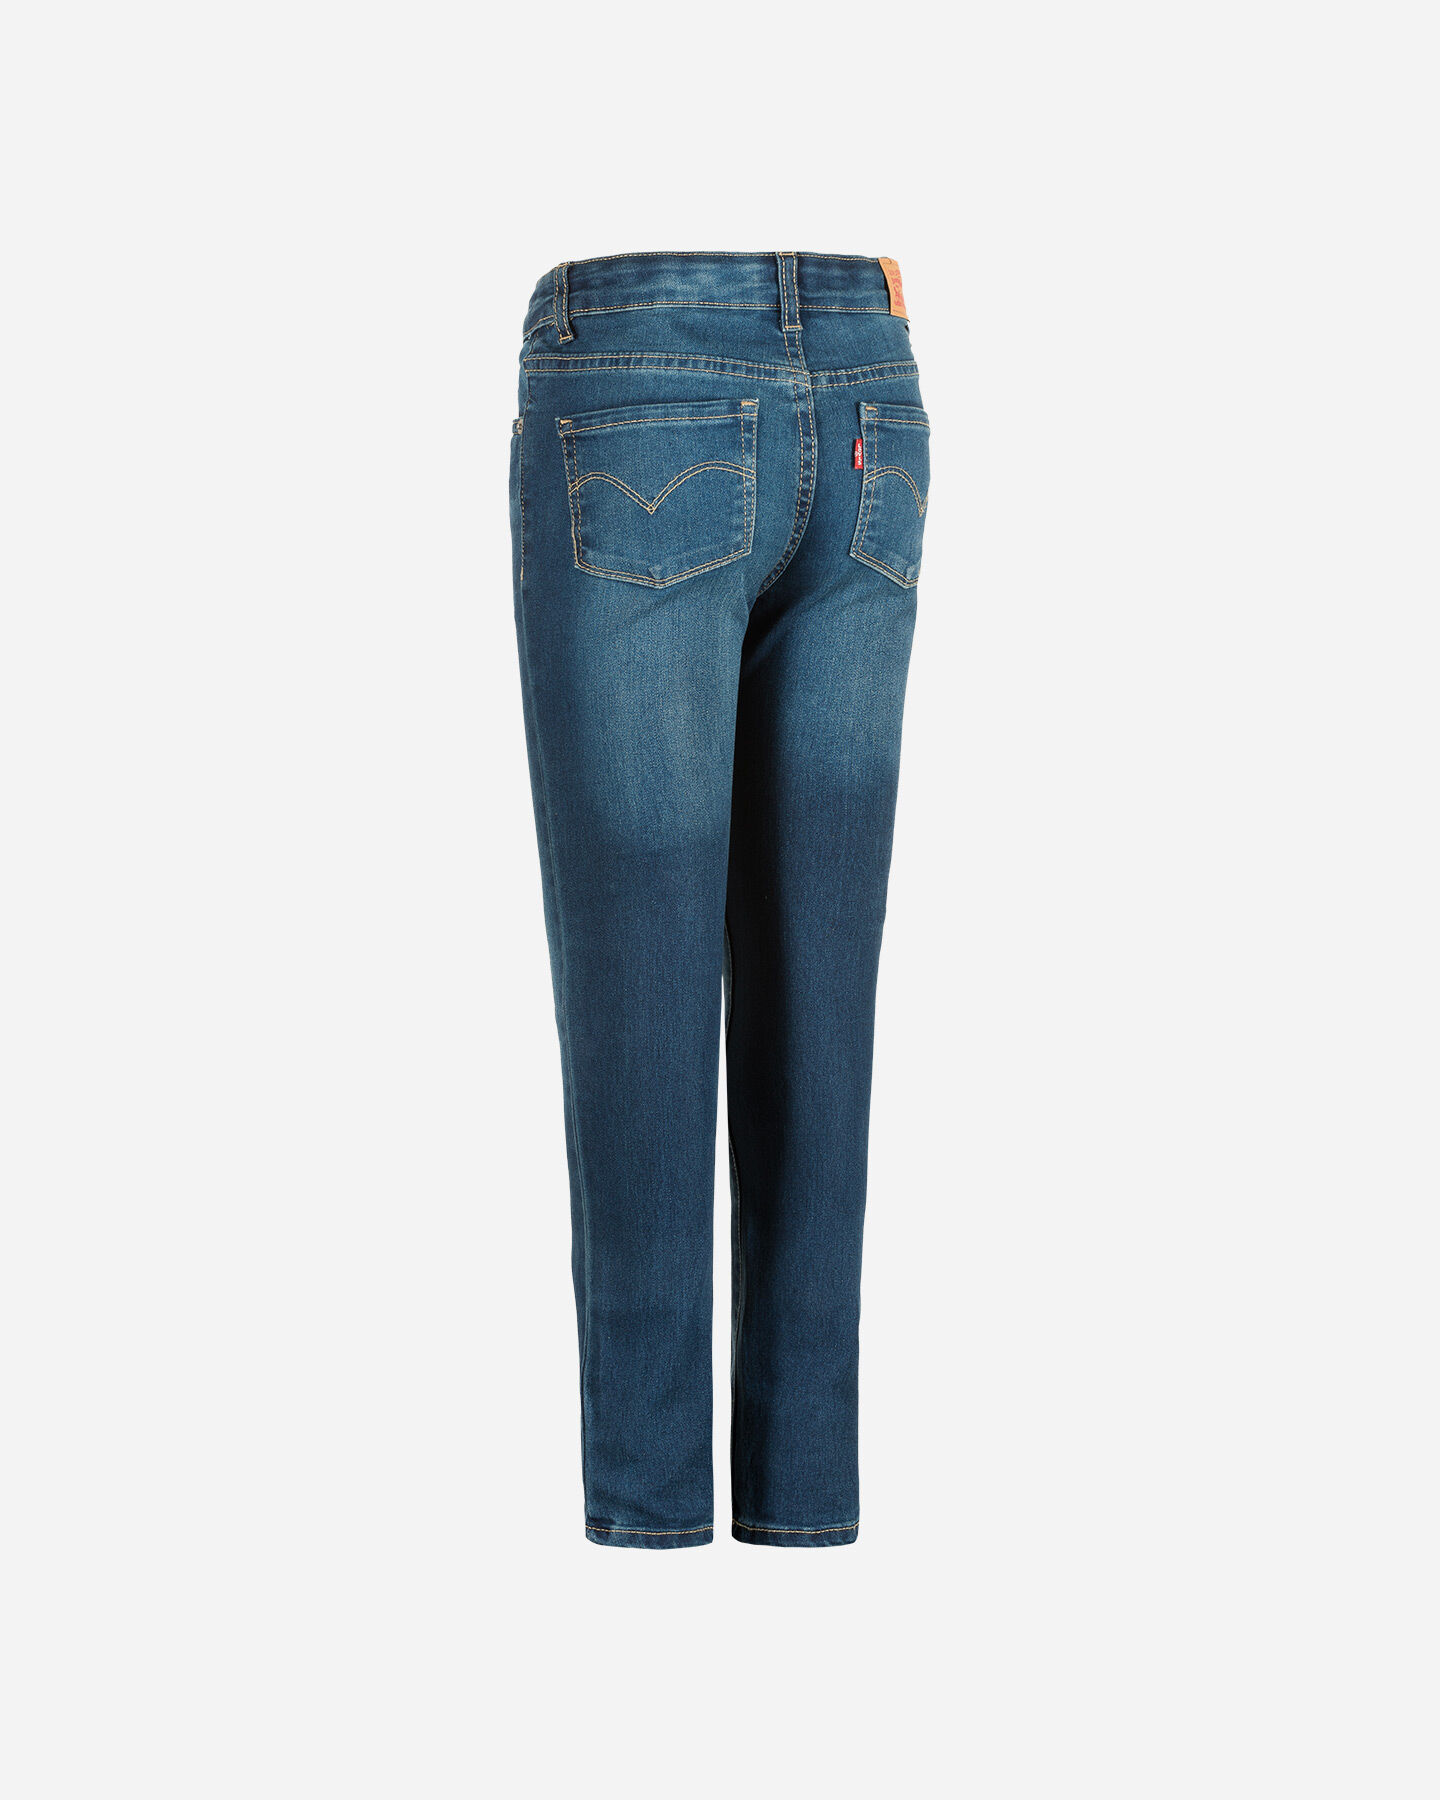  Jeans LEVI'S 711 SKINNY JR S4076442|MAM|6A scatto 1